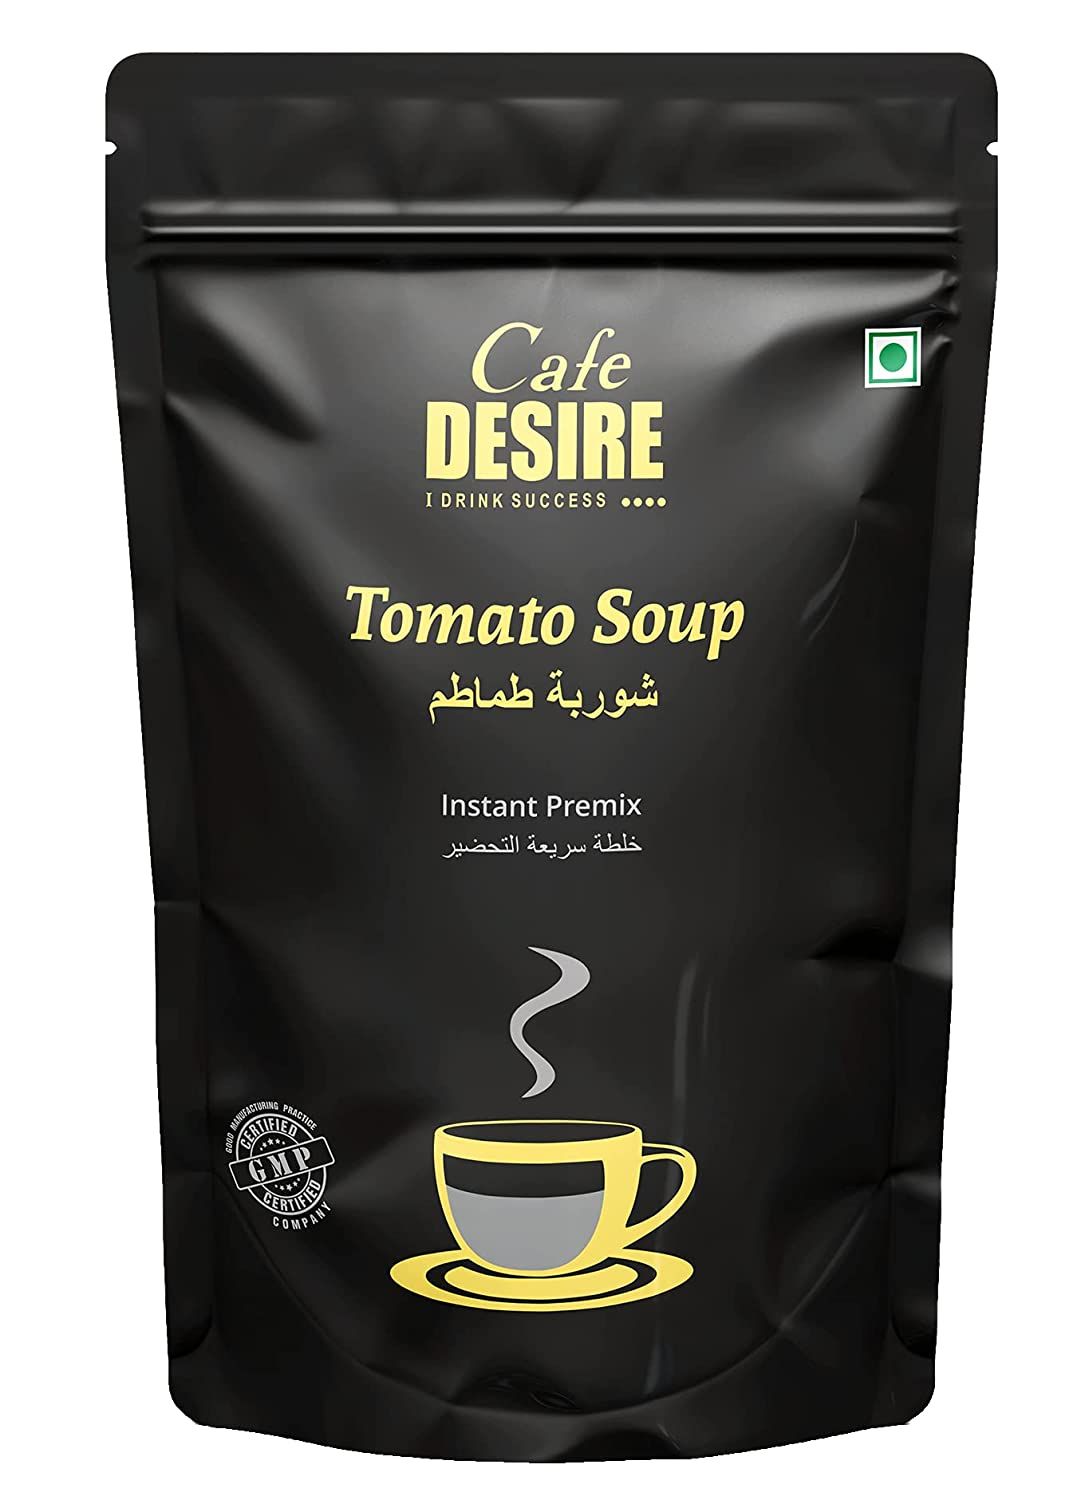 Cafe Desire Drink Success Instant Tomato Soup Image